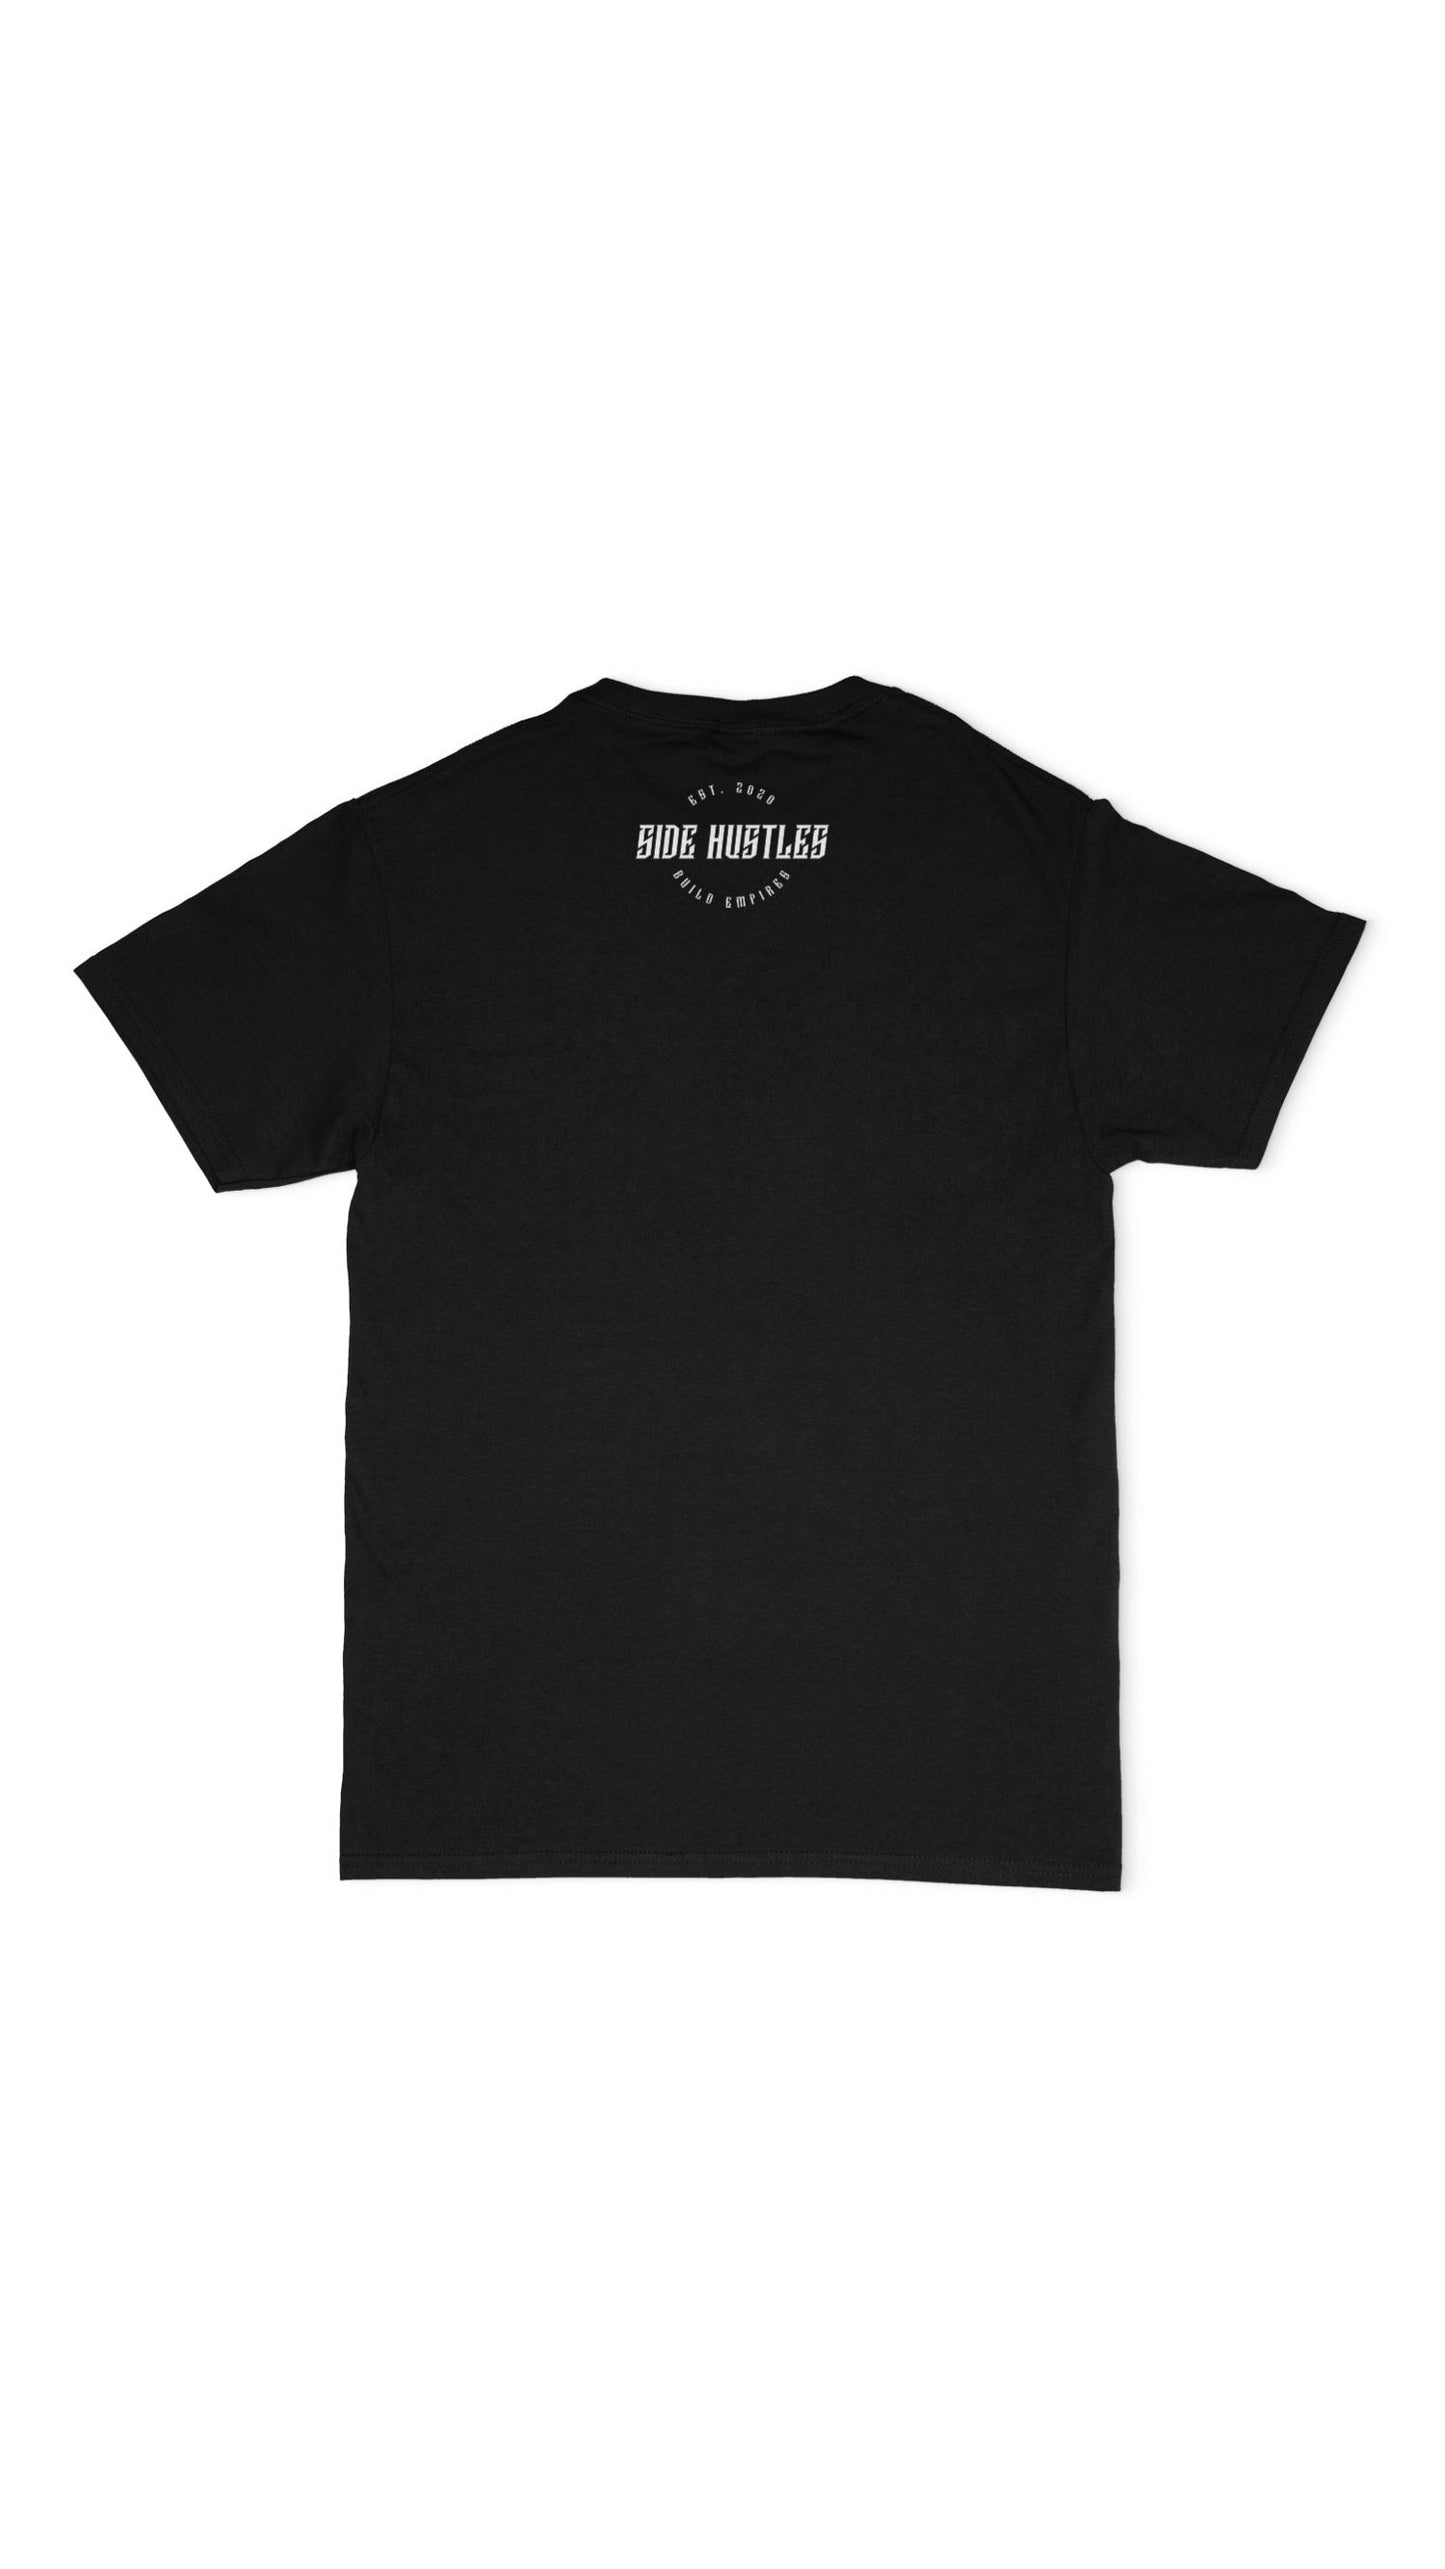 Premium black soft shirt with small logo on back collar screen printed